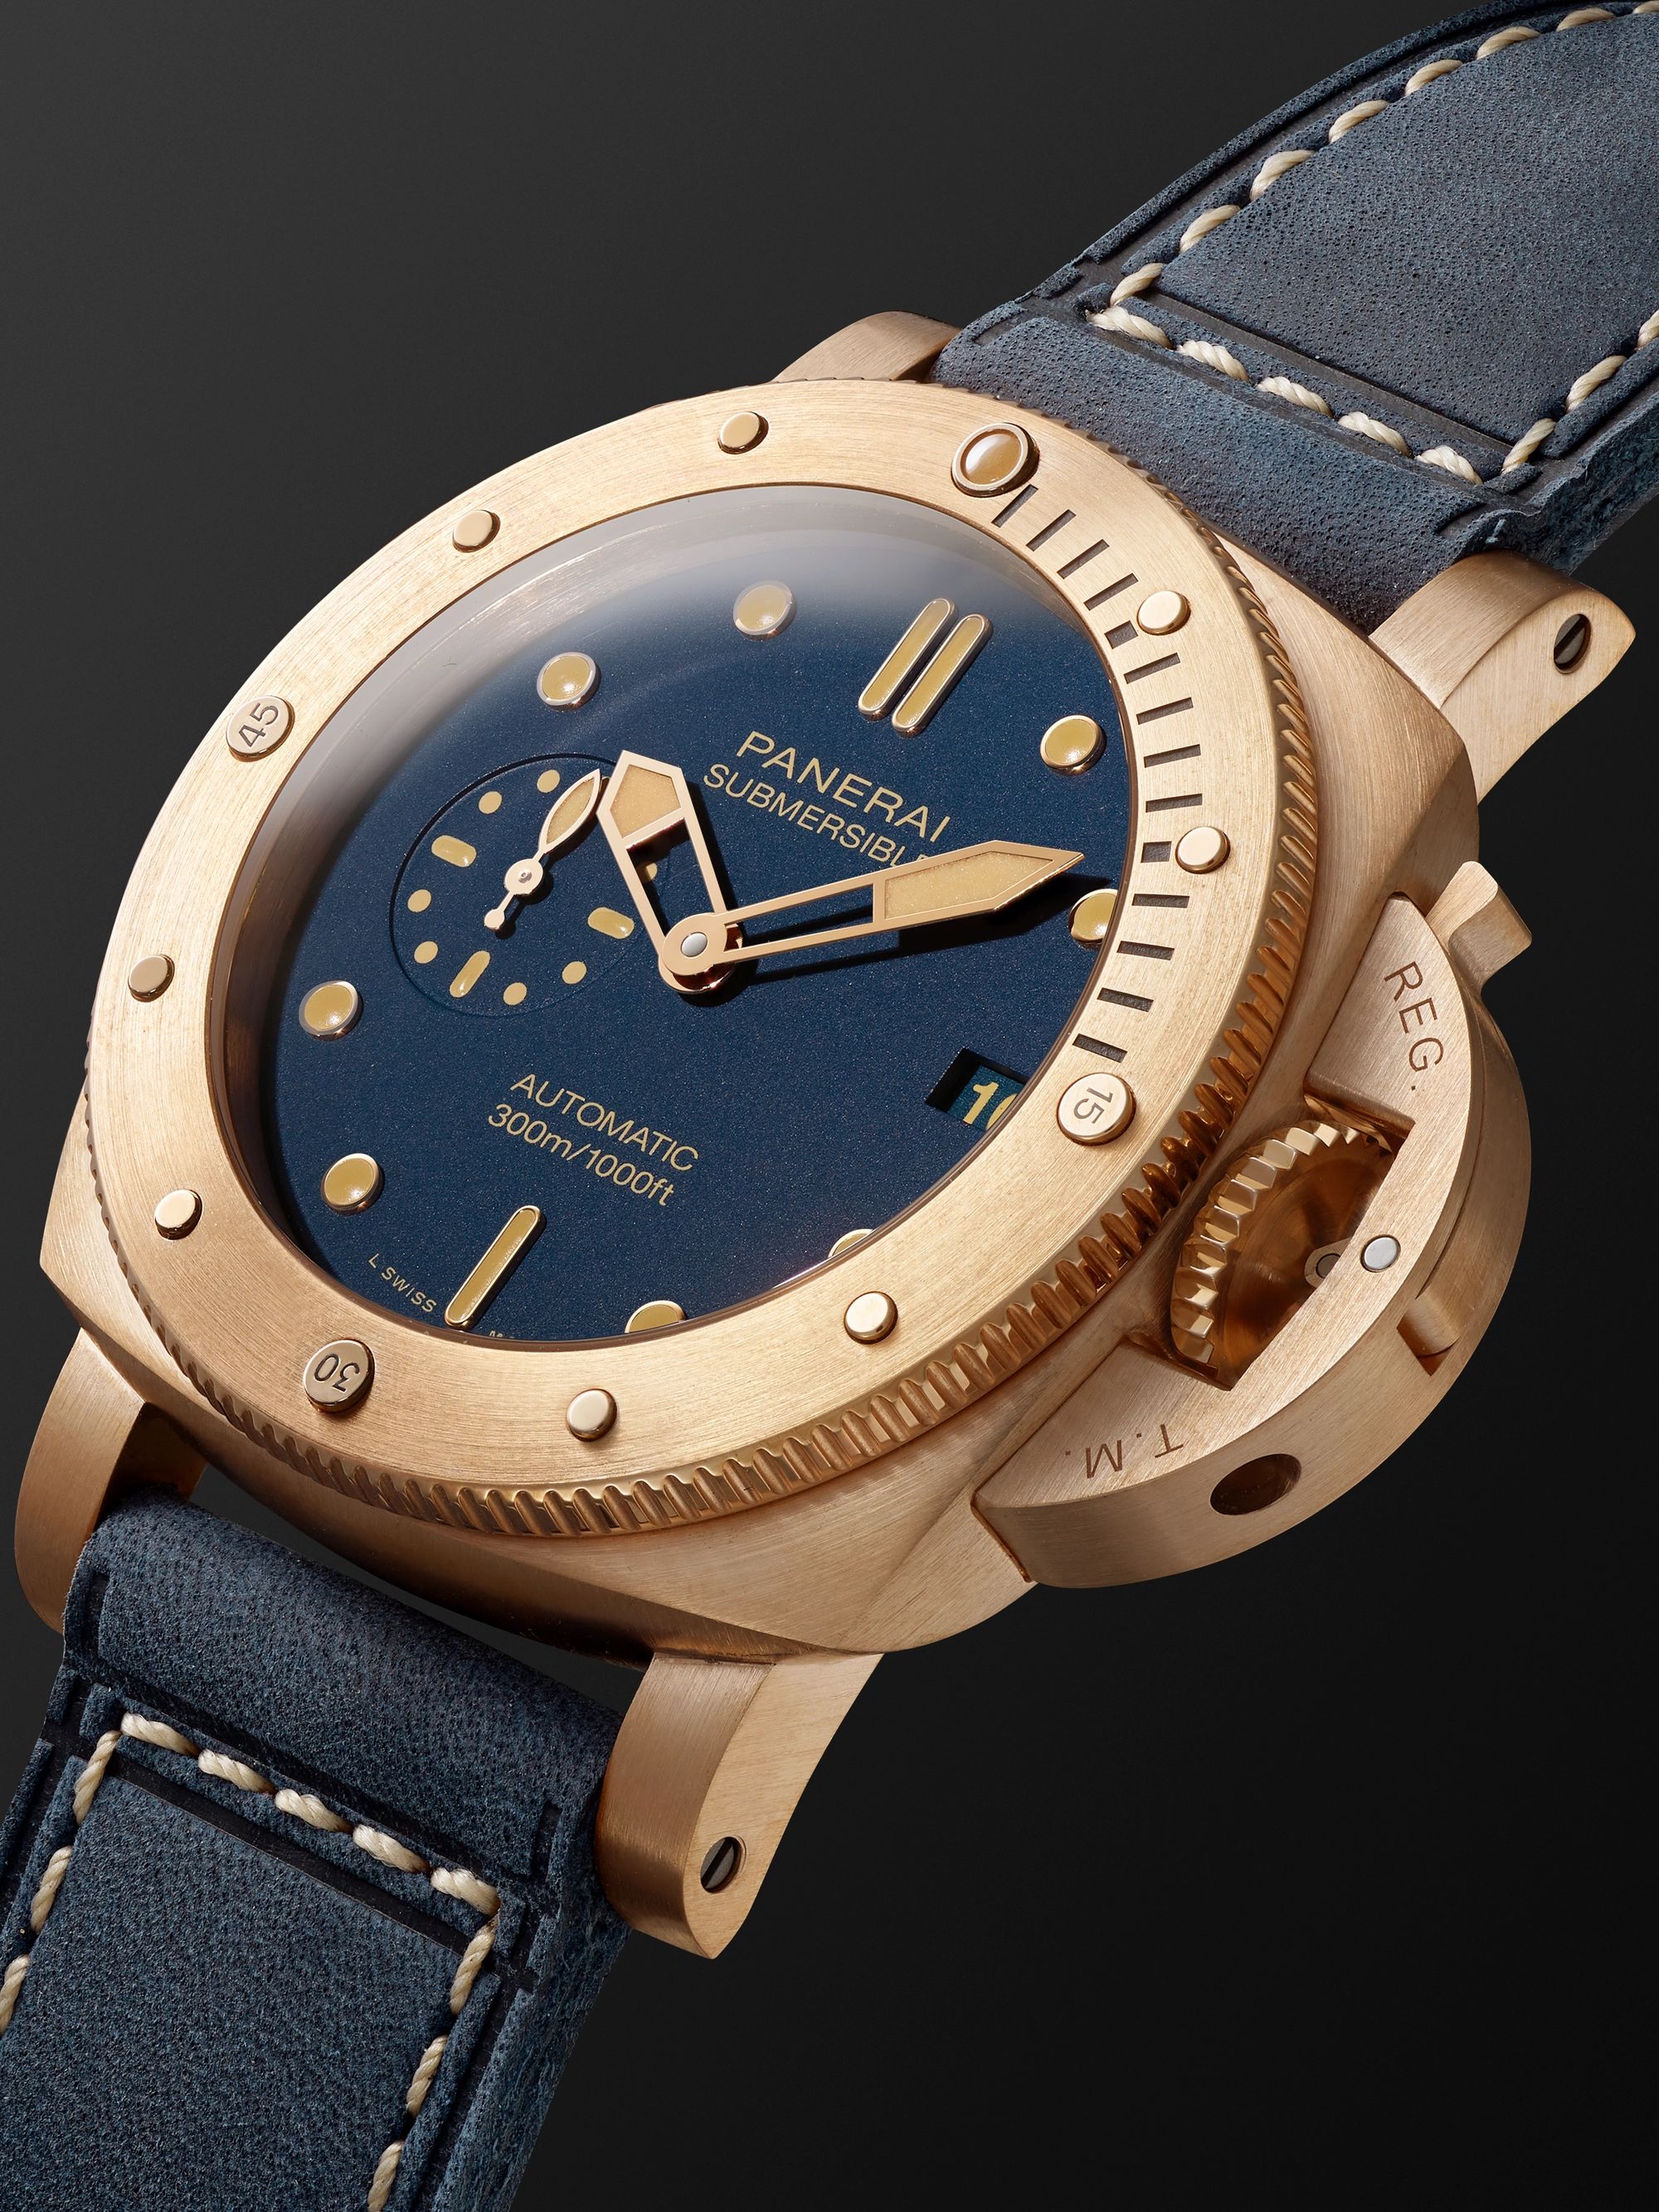 PANERAI Submersible Blu Abisso Automatic 42mm Bronze and Leather Watch, Ref. No. PAM01074